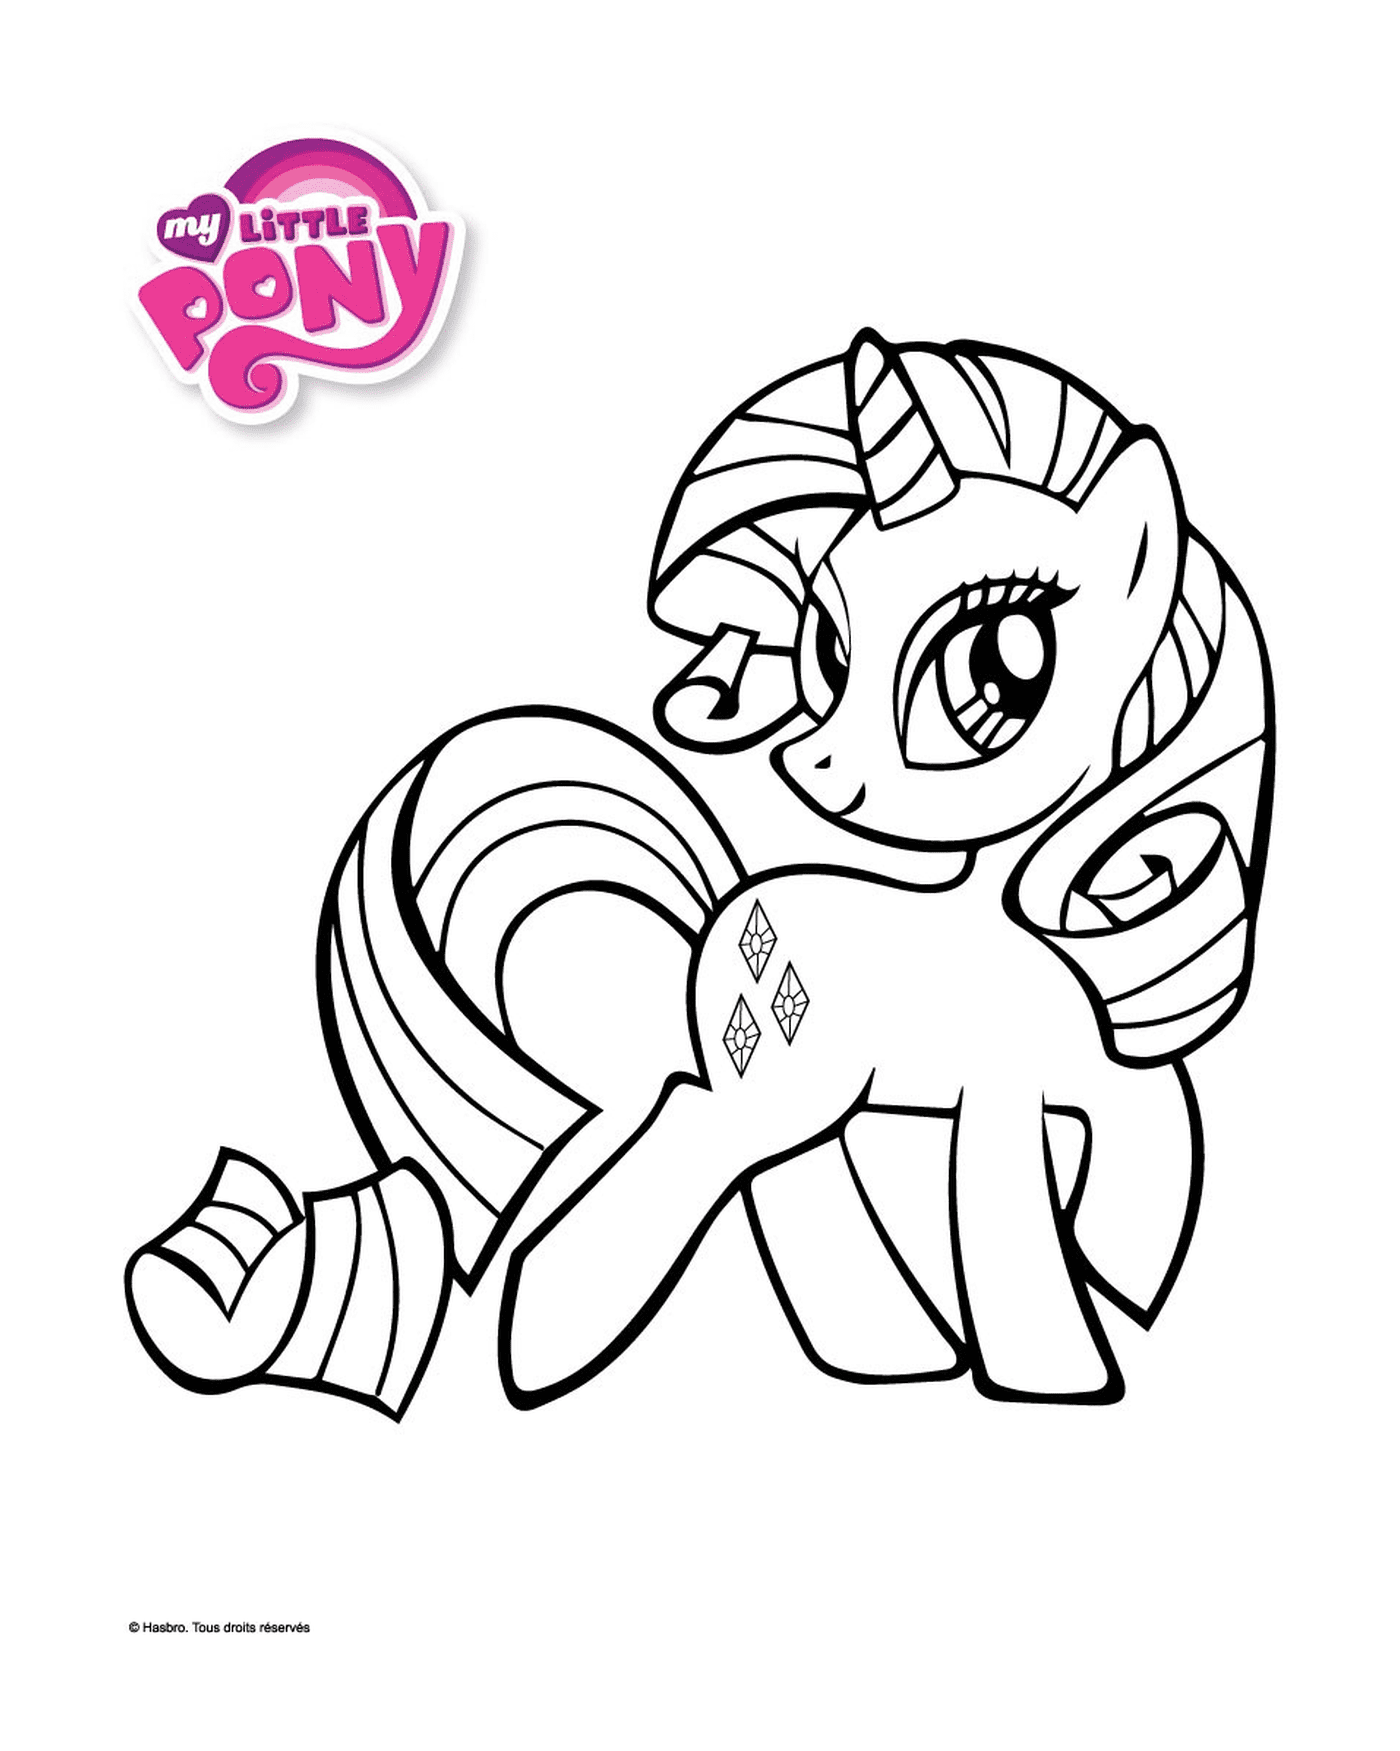  My Little Pony, cute with nice ribbon 